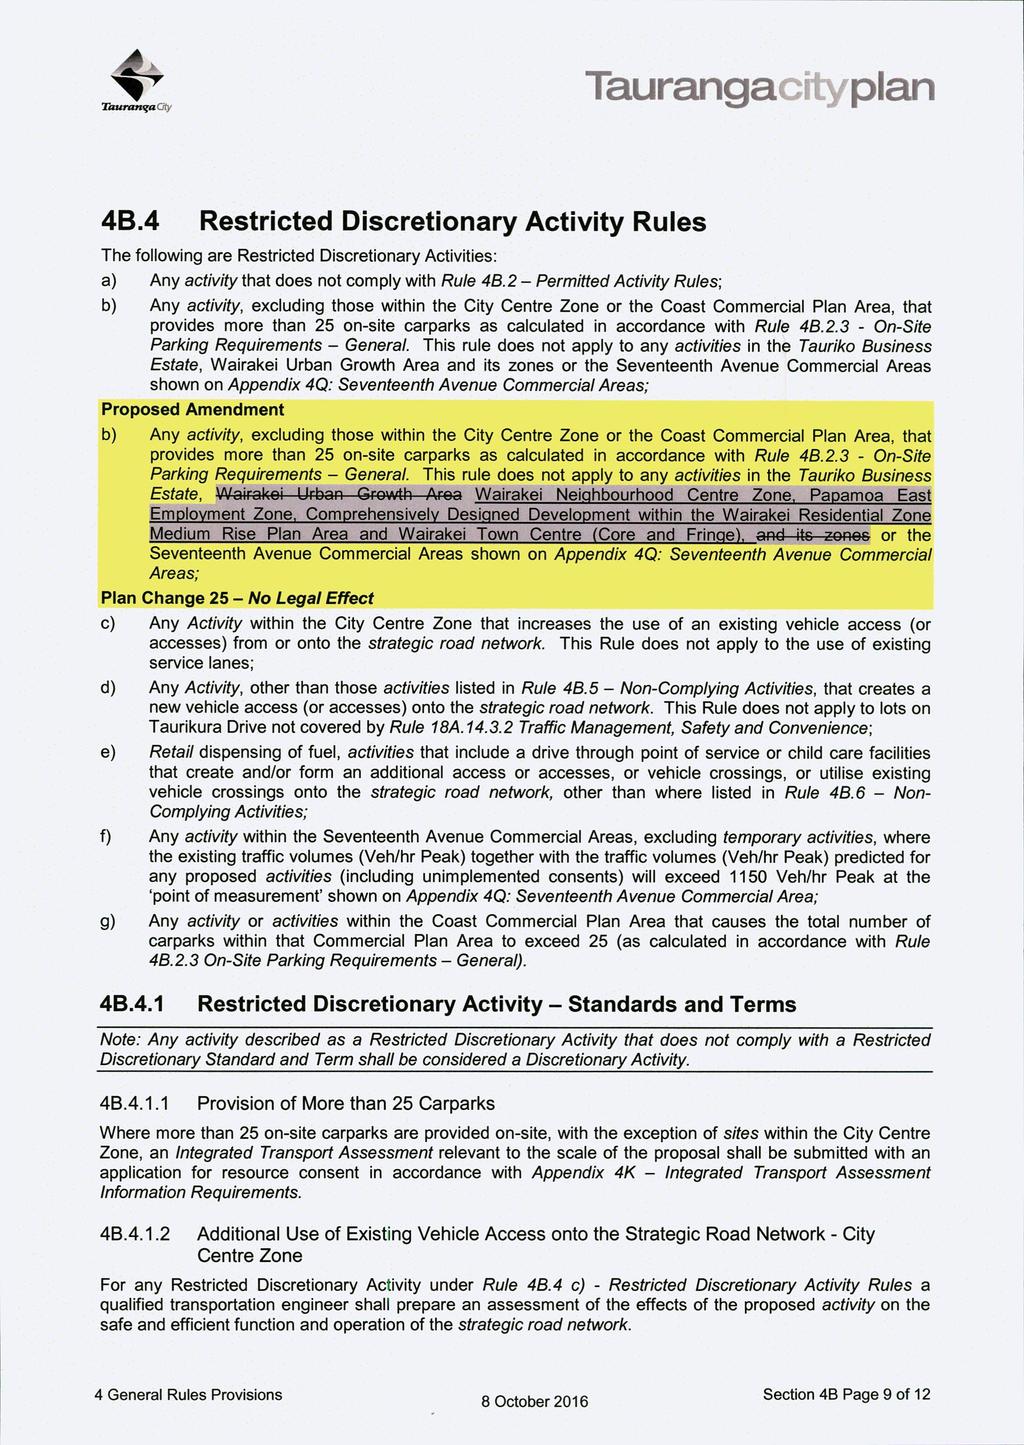 TaurangaCity plan TauranifaOty 4B.4 Restricted Discretionary Activity Rules The following are Restricted Discretionary Activities: a) Any activity that does not comply with Rule 46.